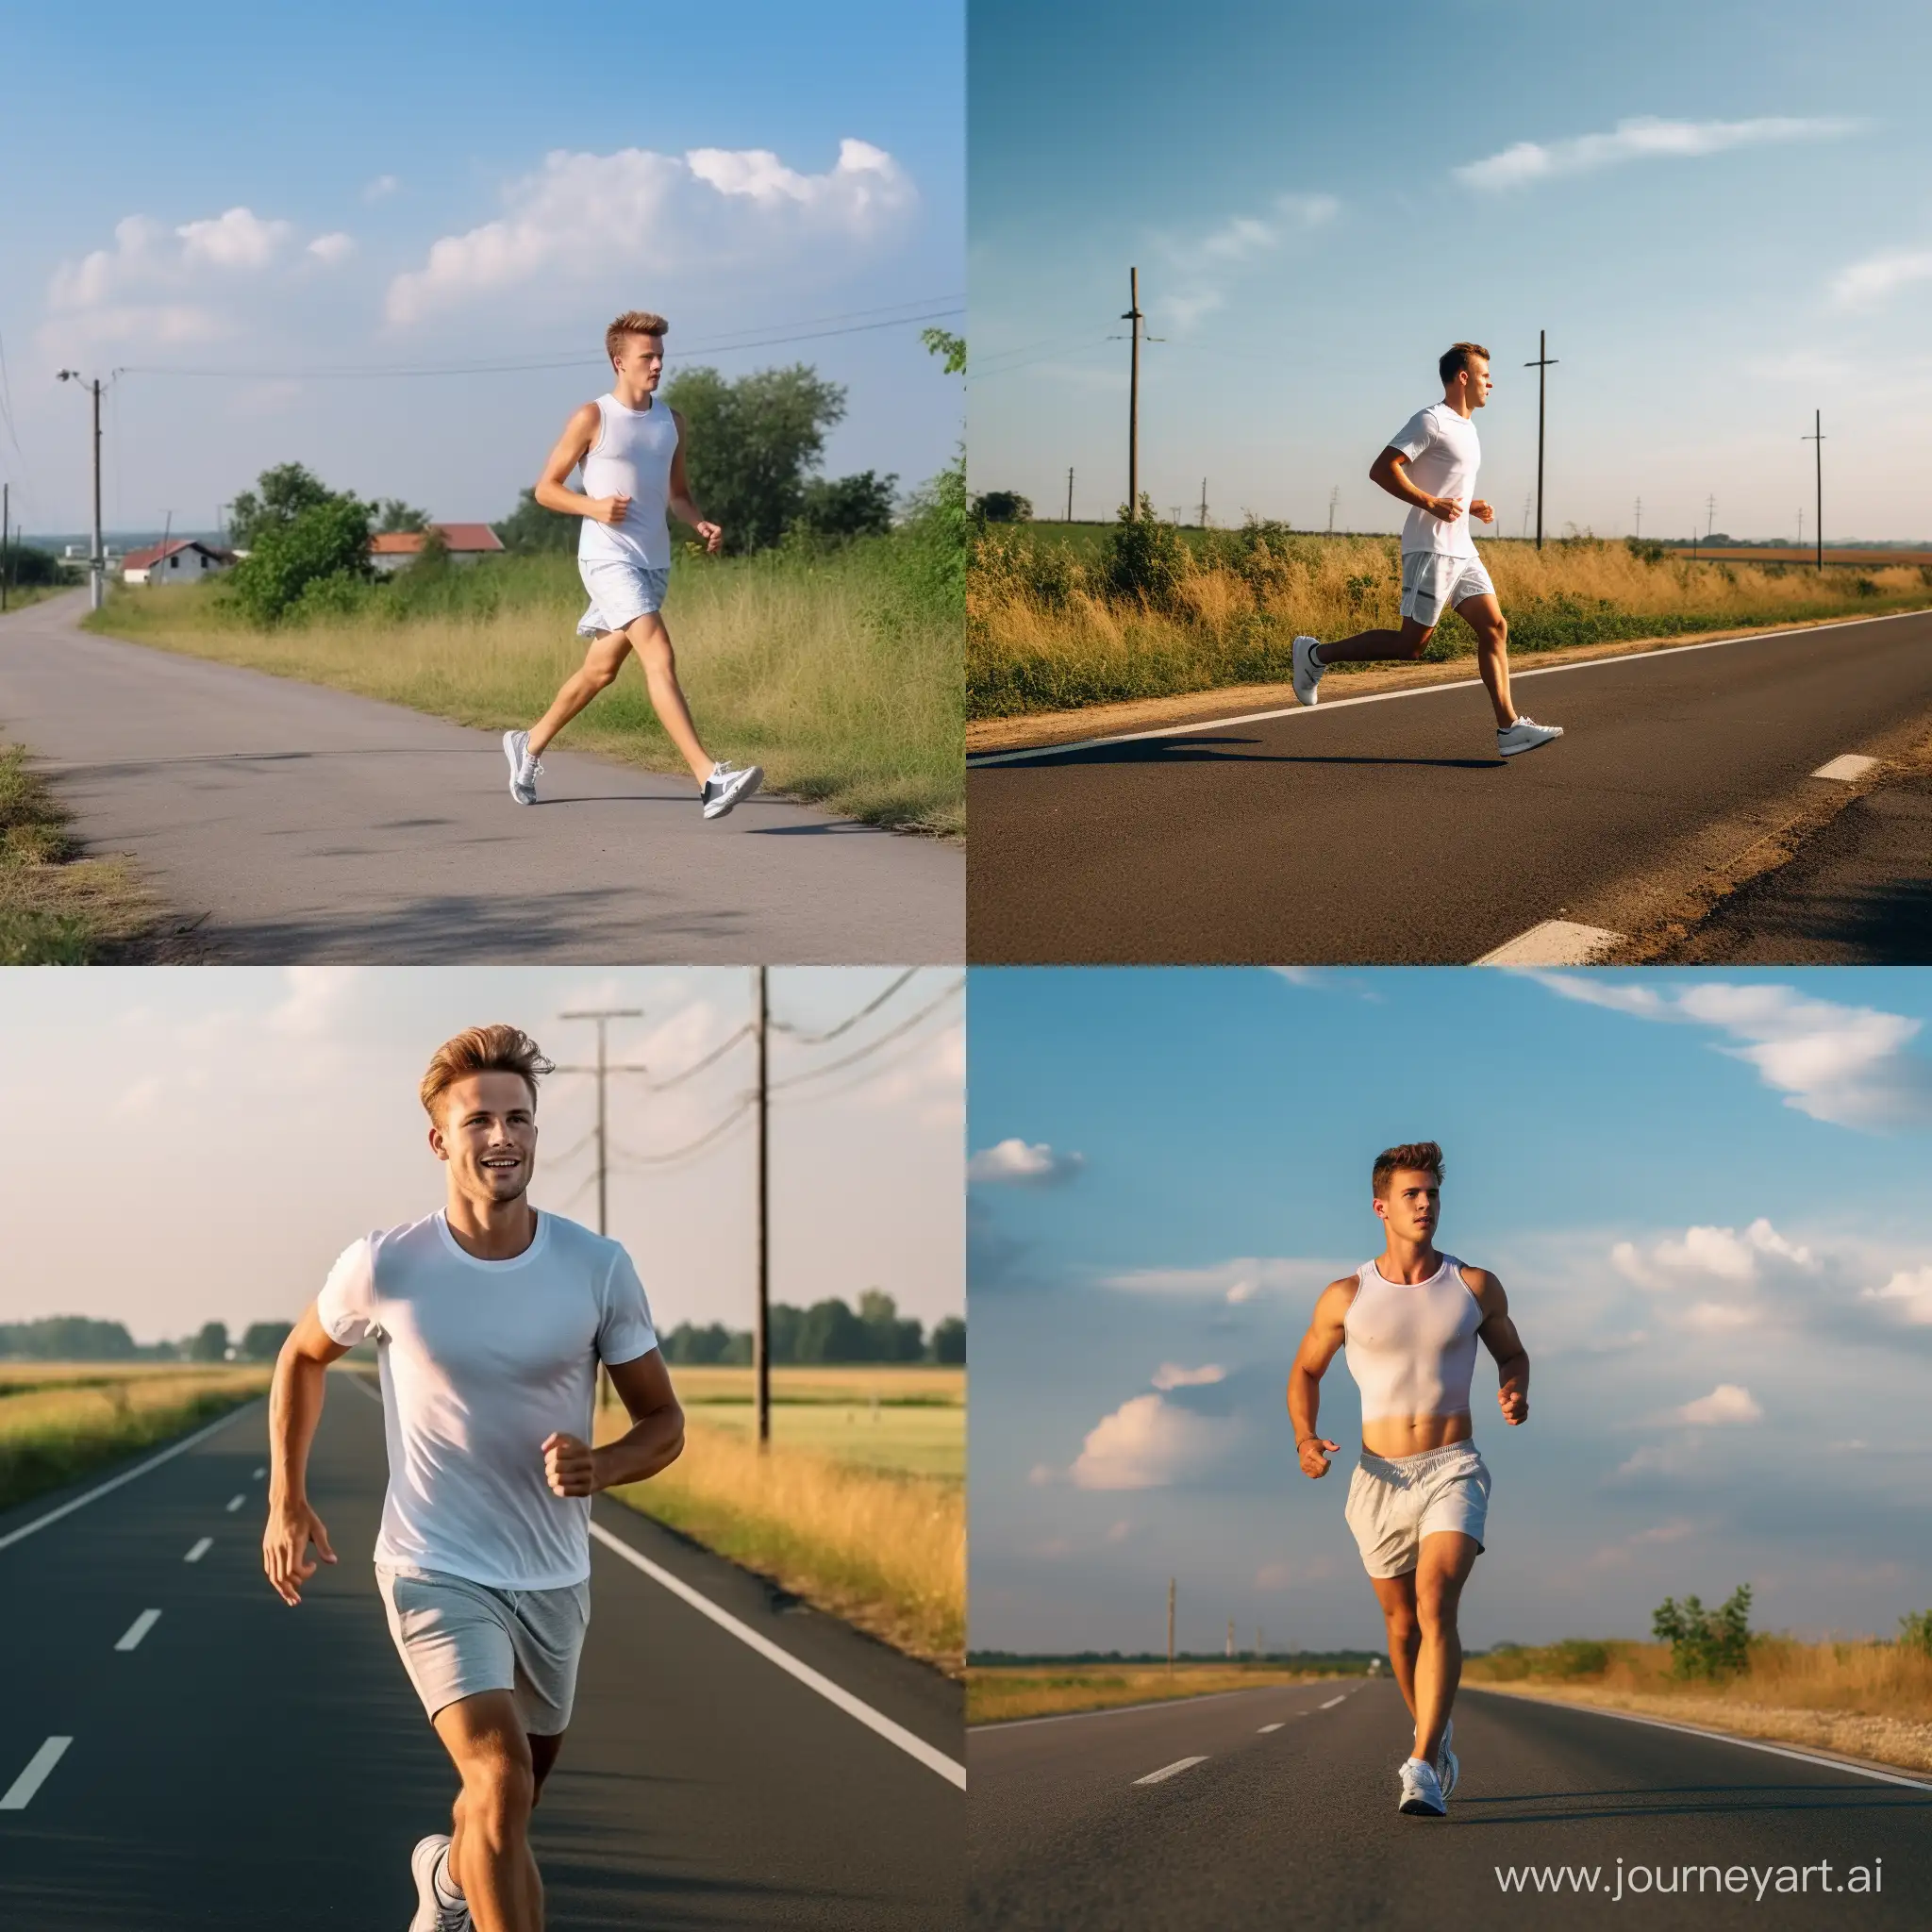 Morning-Jogging-Active-Man-in-White-Tshirt-and-Blue-Shorts